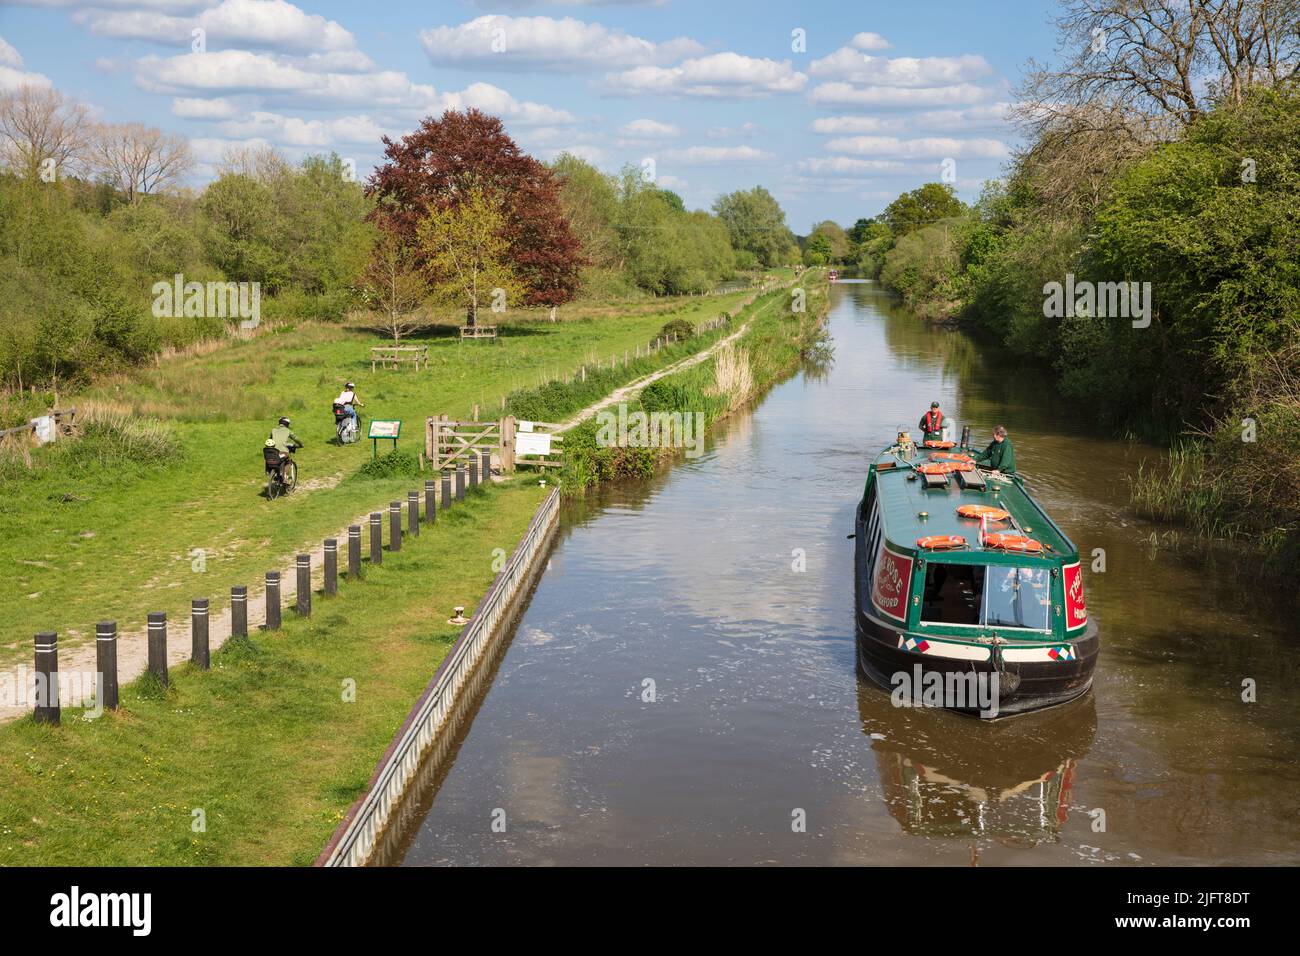 View along the Kennet and Avon canal with canal barge cruise in afternoon sunlight, Hungerford, Berkshire, England, United Kingdom, Europe Stock Photo